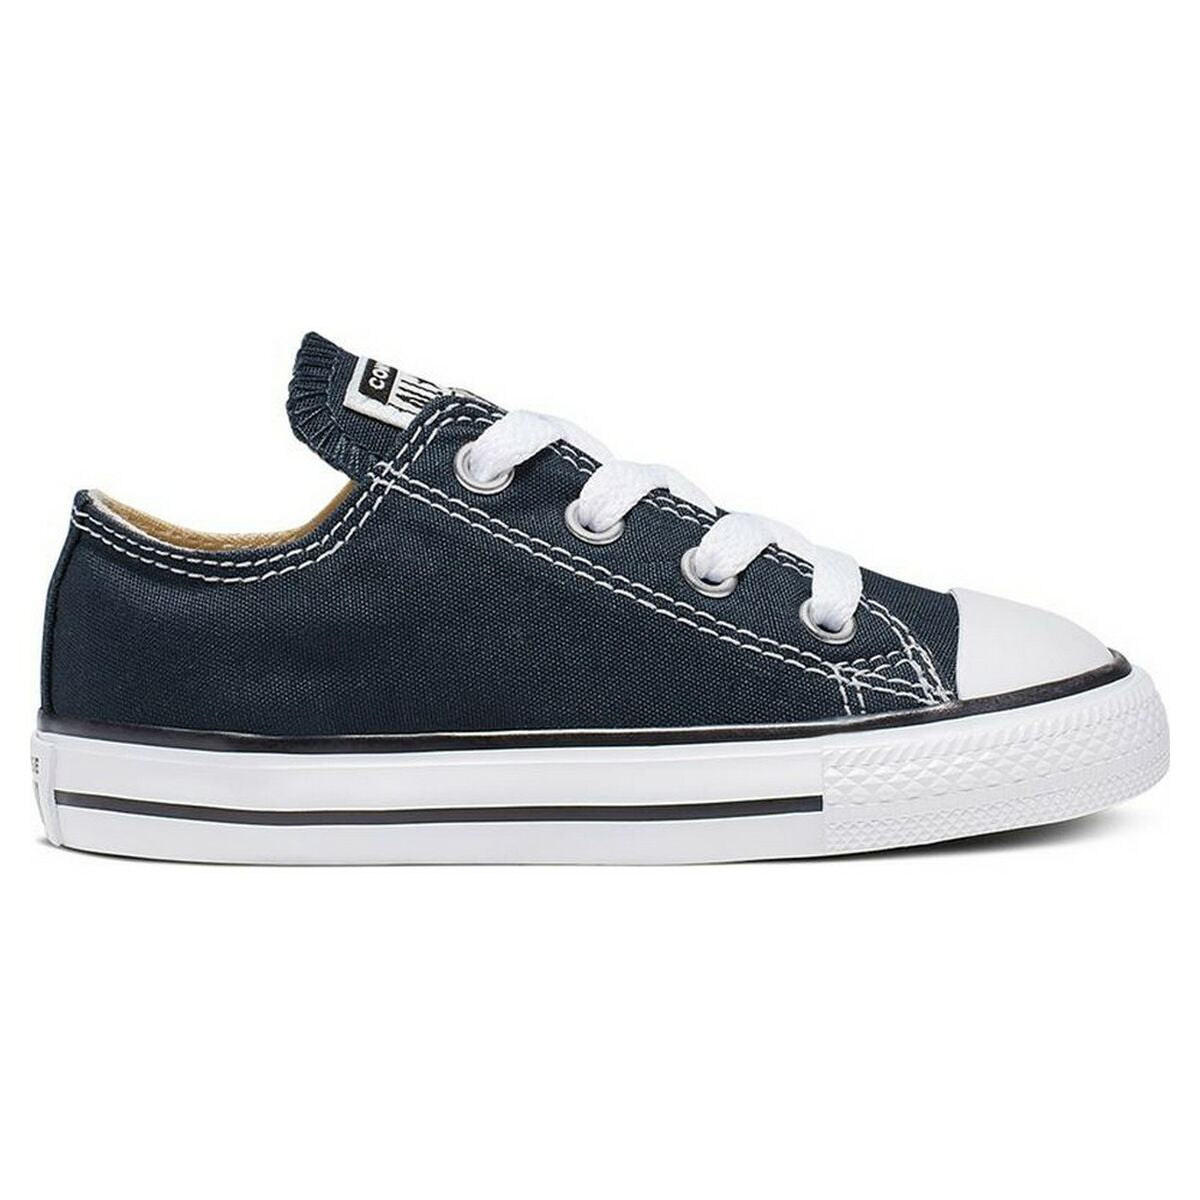 Sports Trainers For Women Converse Chuck Taylor All Star Navy Blue Dark Blue-Fashion | Accessories > Clothes and Shoes > Sports shoes-Converse-Urbanheer